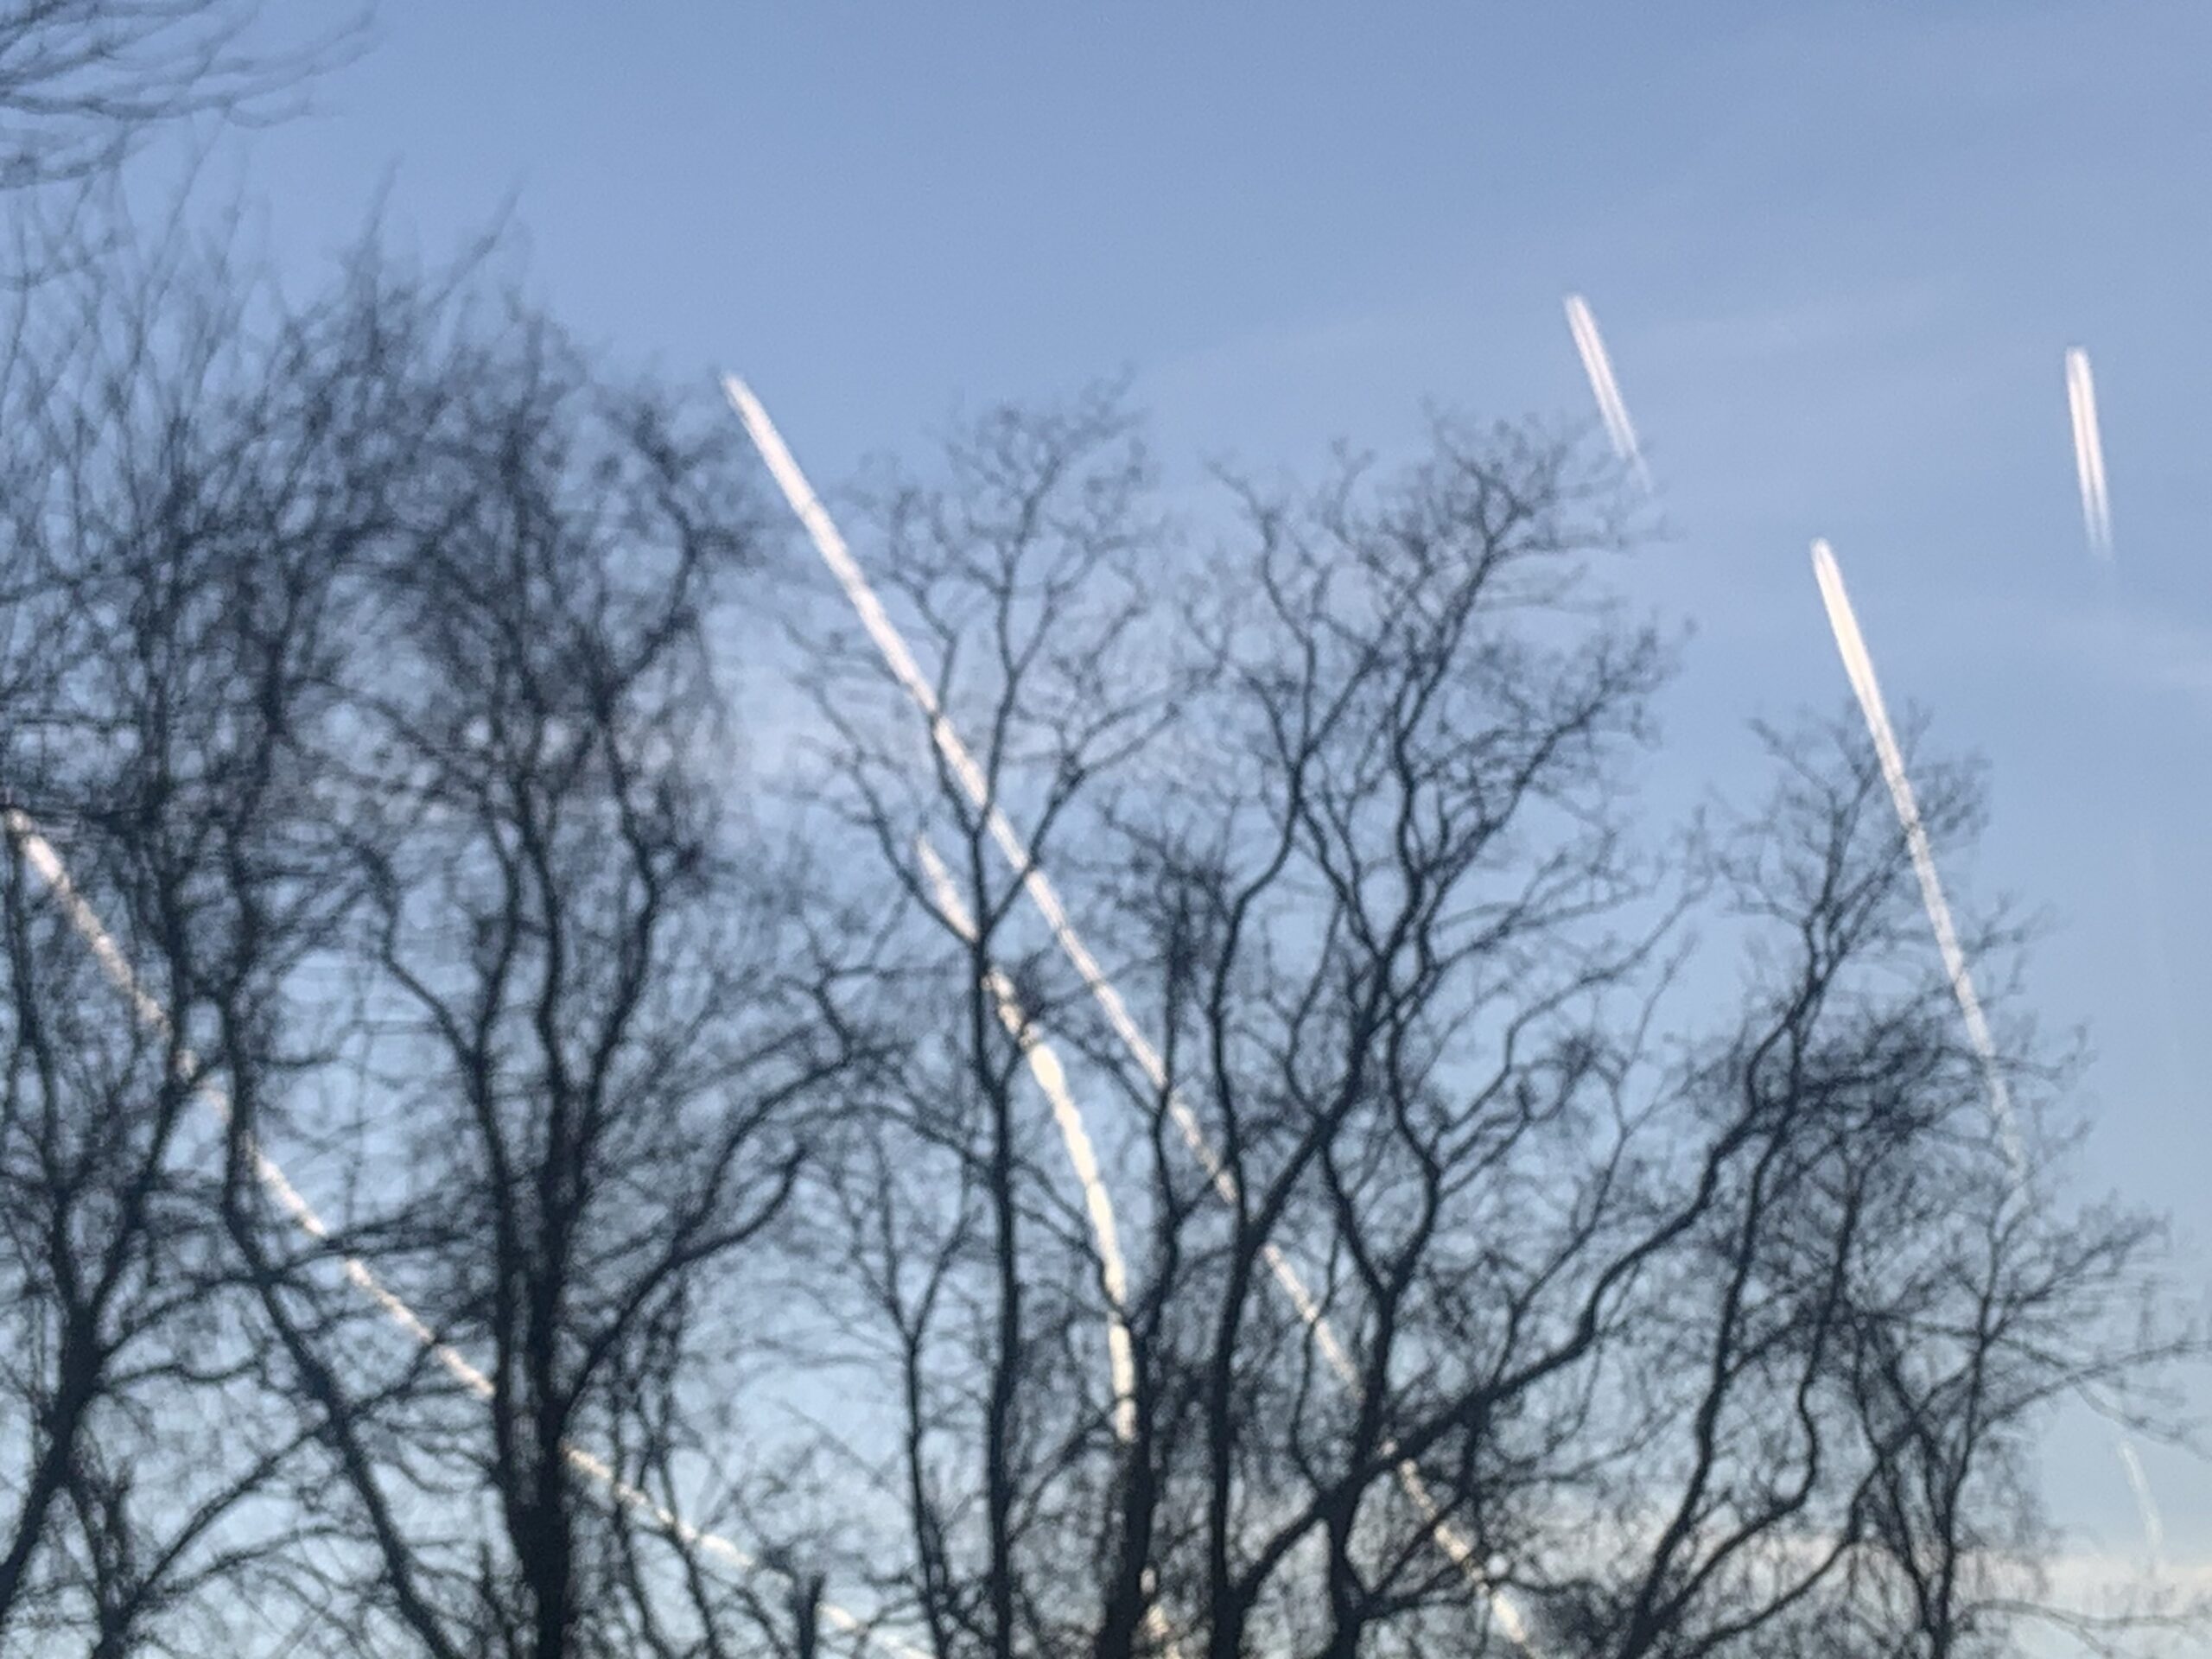 A squadron of jets flew overhead on the afternoon of January 24, the view form Scuttle Hole Road, Bridgehampton. STEPHEN J. KOTZ